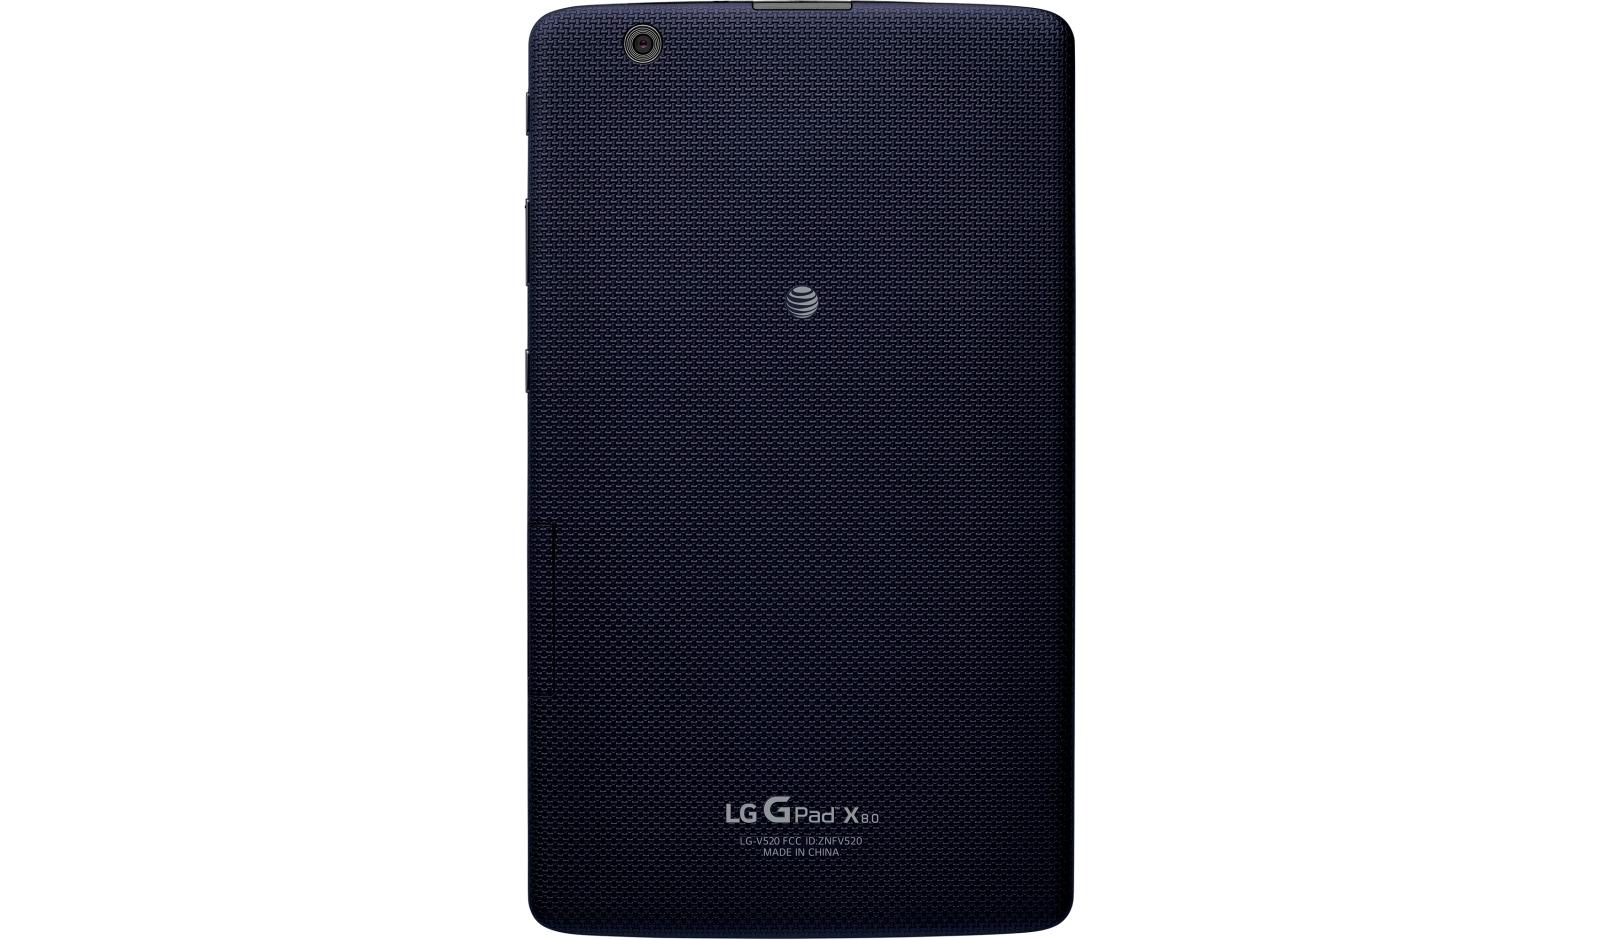 Restored LG G Pad X V520 8in 32GB Blue Android Tablet (AT&T) Grade A (Refurbished) - image 5 of 6